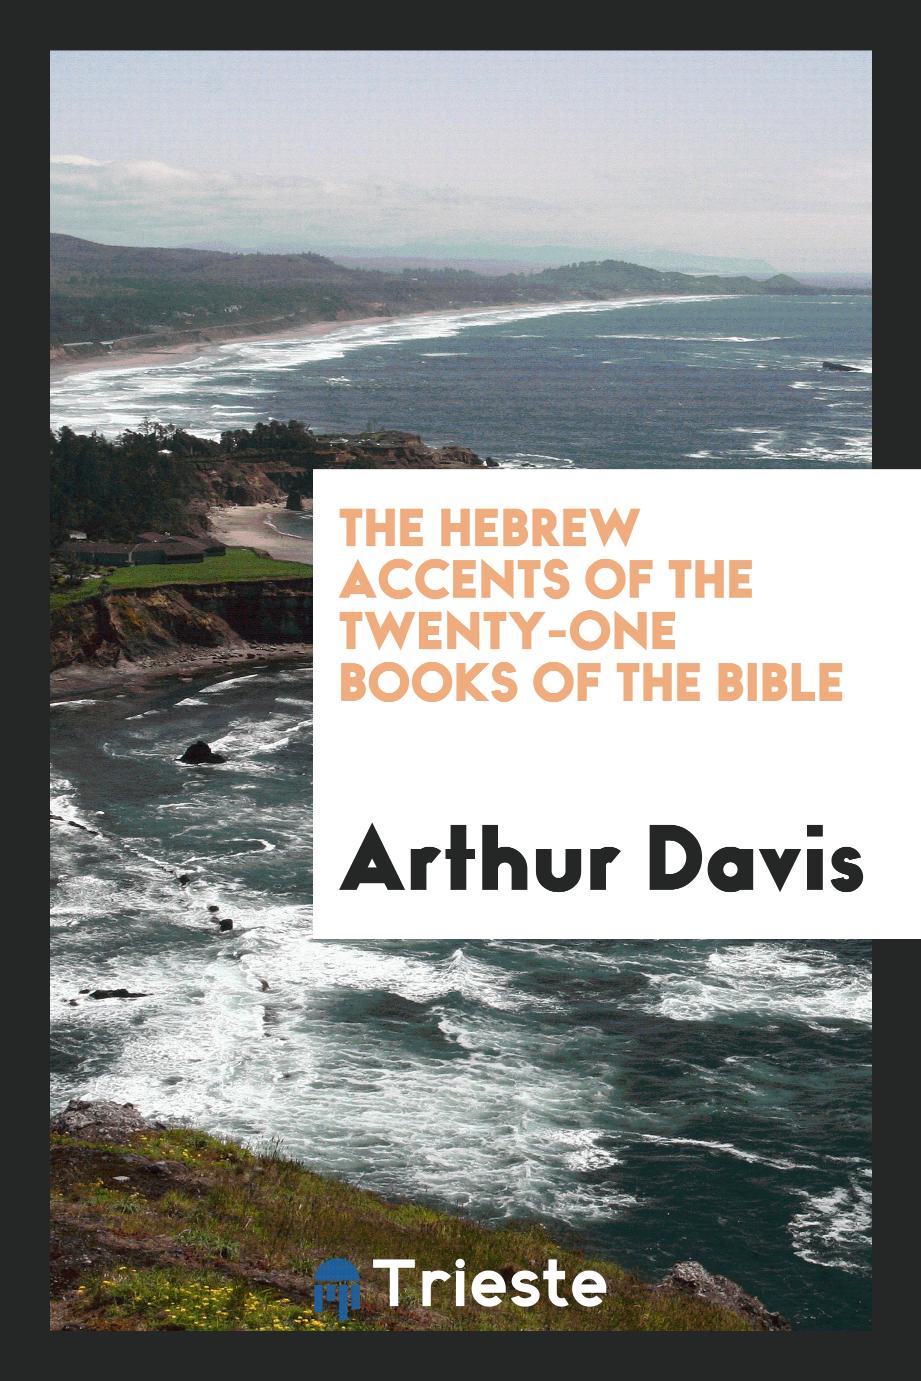 The Hebrew accents of the twenty-one Books of the Bible